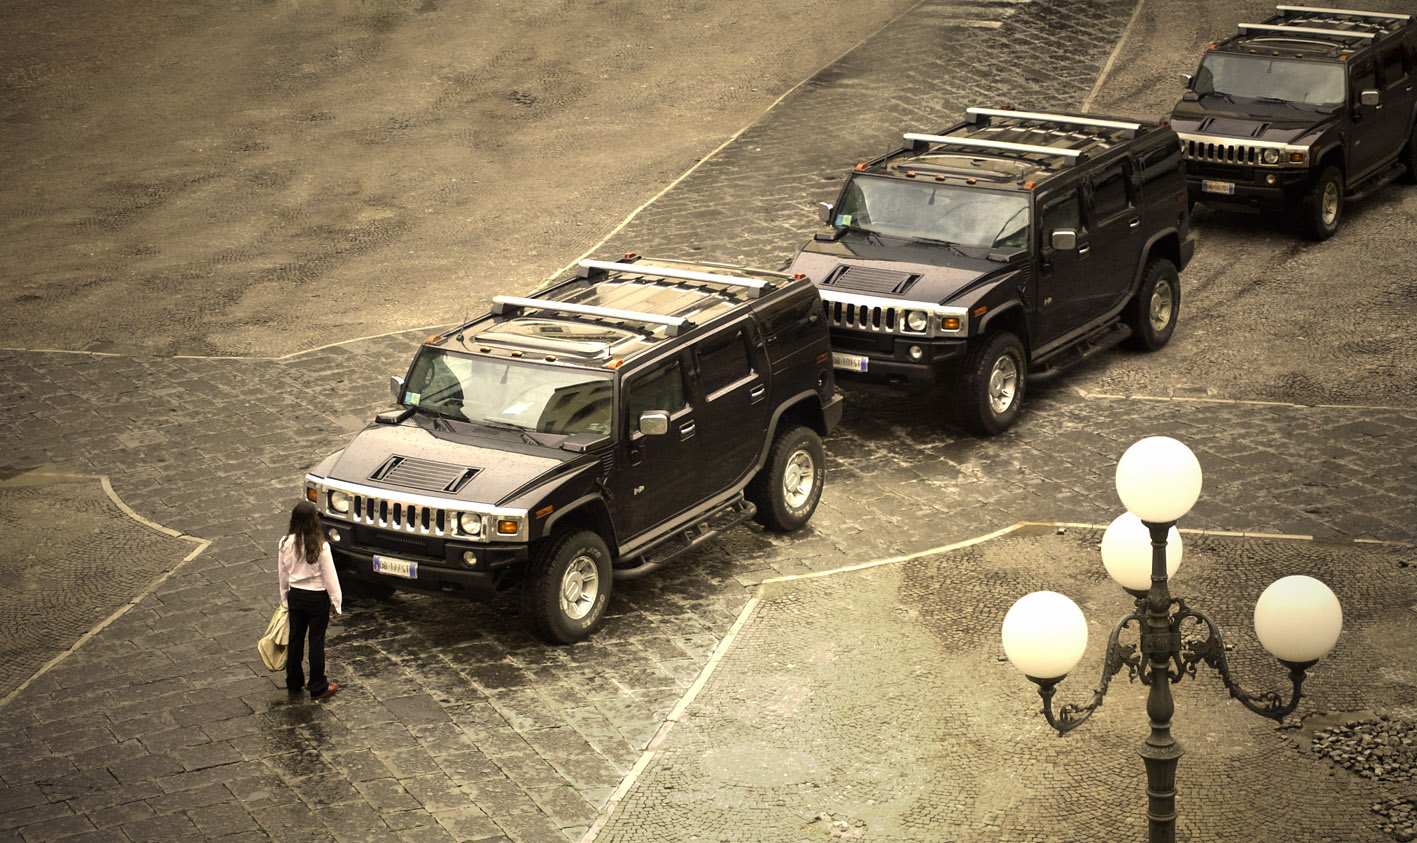 General 1417x843 women car lamp town square photography Italy Silvio Giordano line-up tribute frontal view anniversary black cars Tank Man Hummer